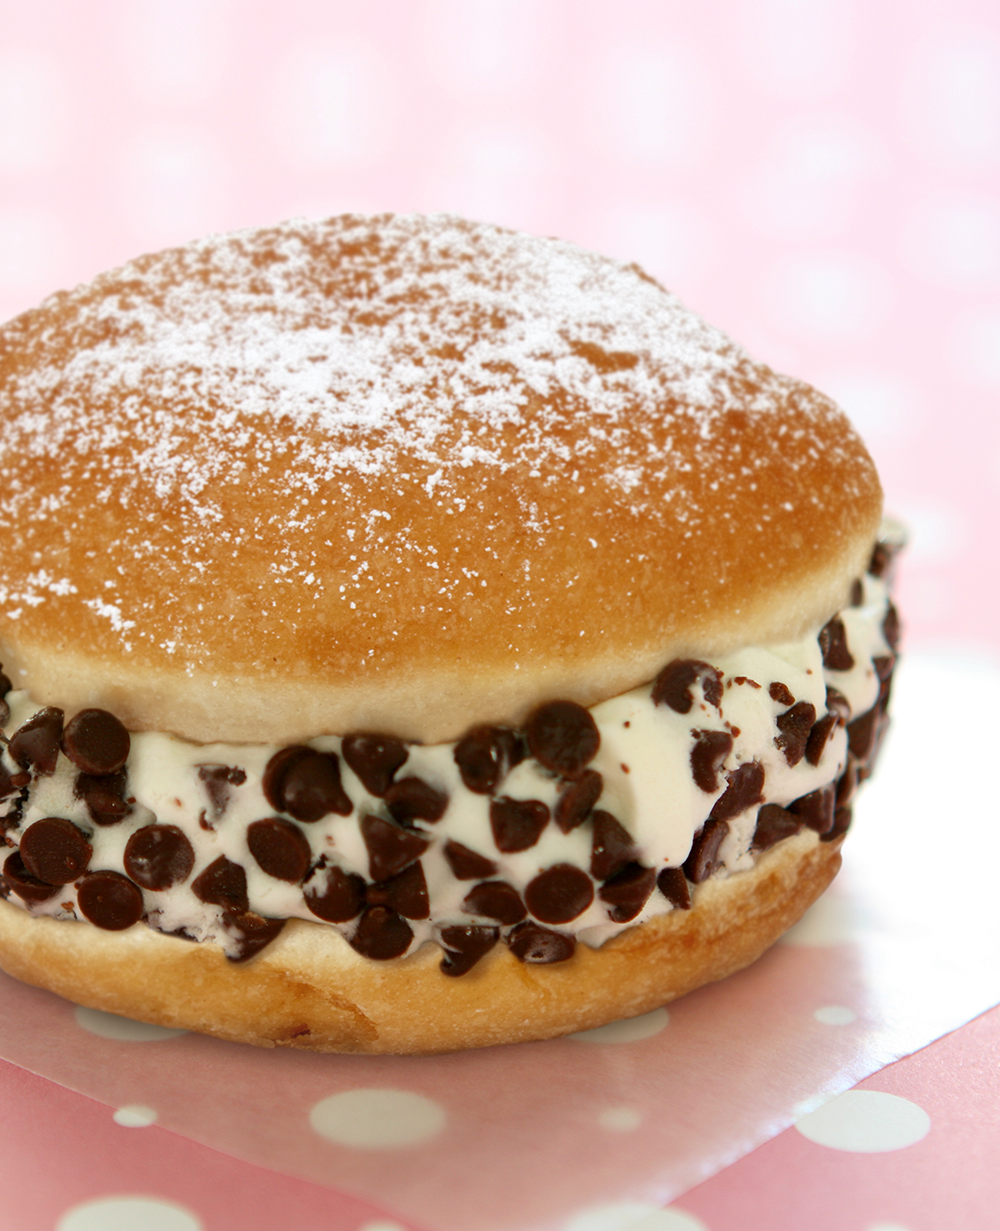 Donut with ice cream and chocolate chips in the middle.